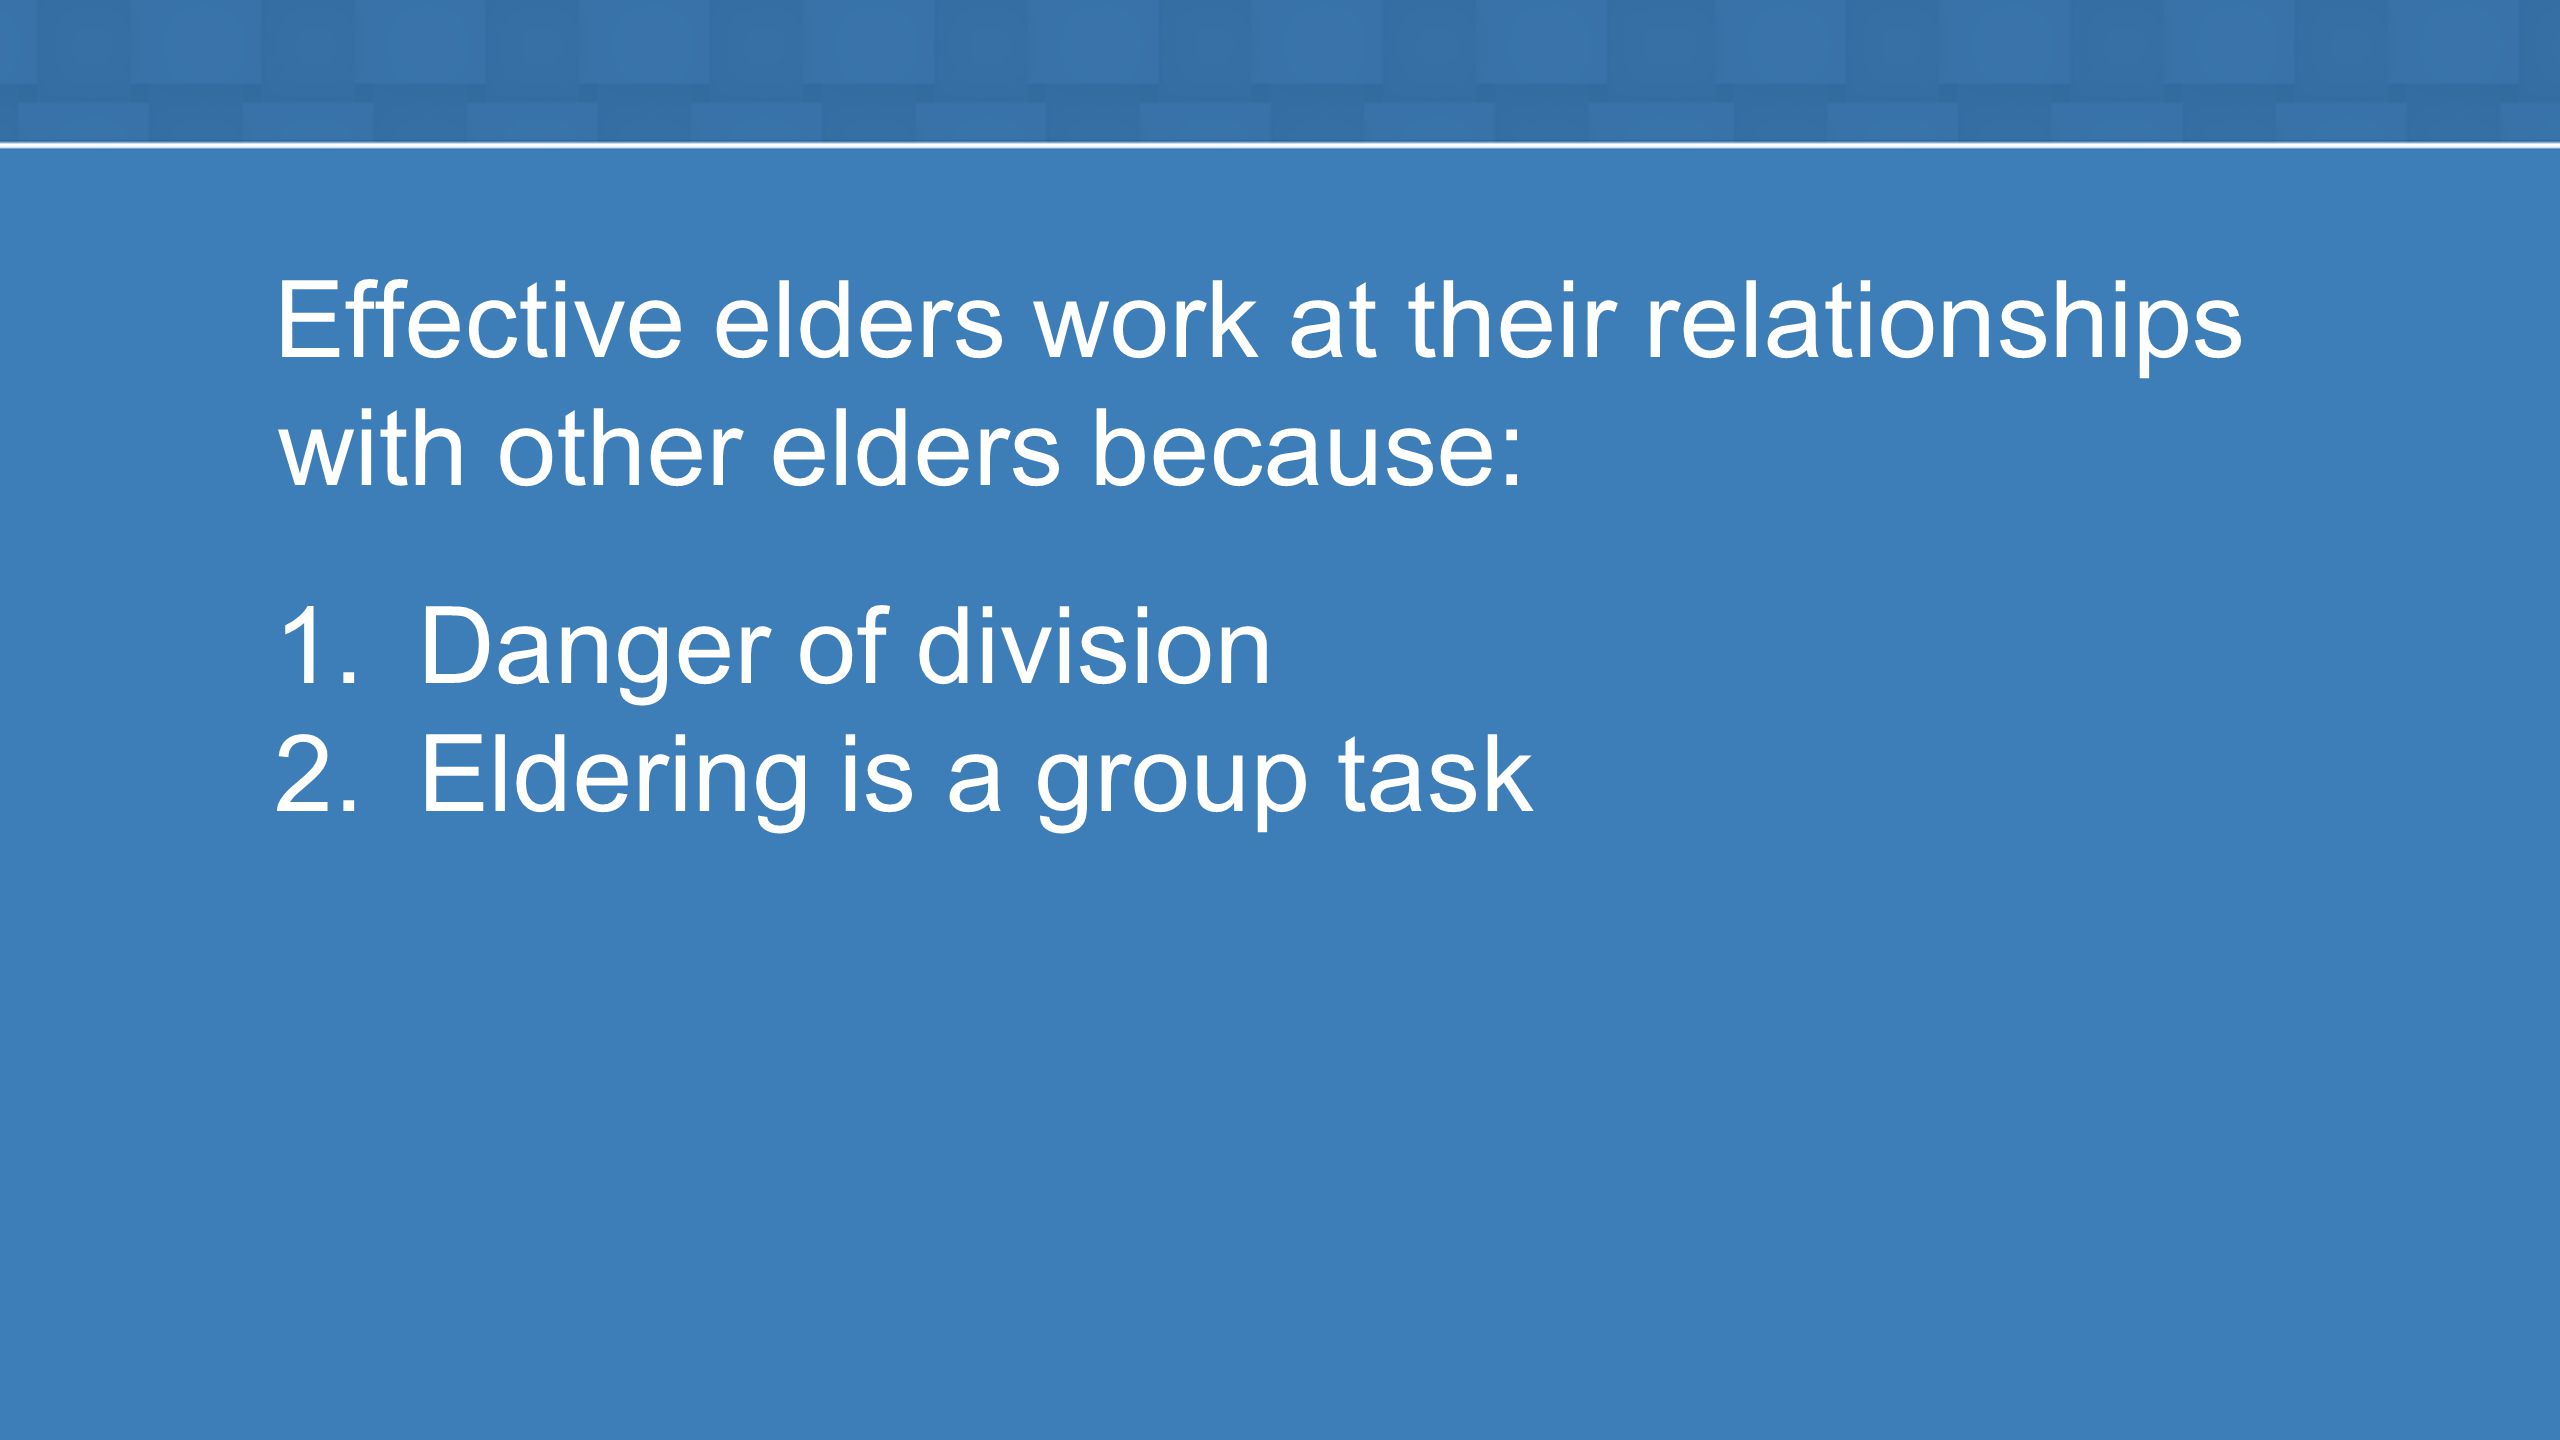 Effective elders work at their relationships with other elders because: 1.Danger of division 2.Eldering is a group task